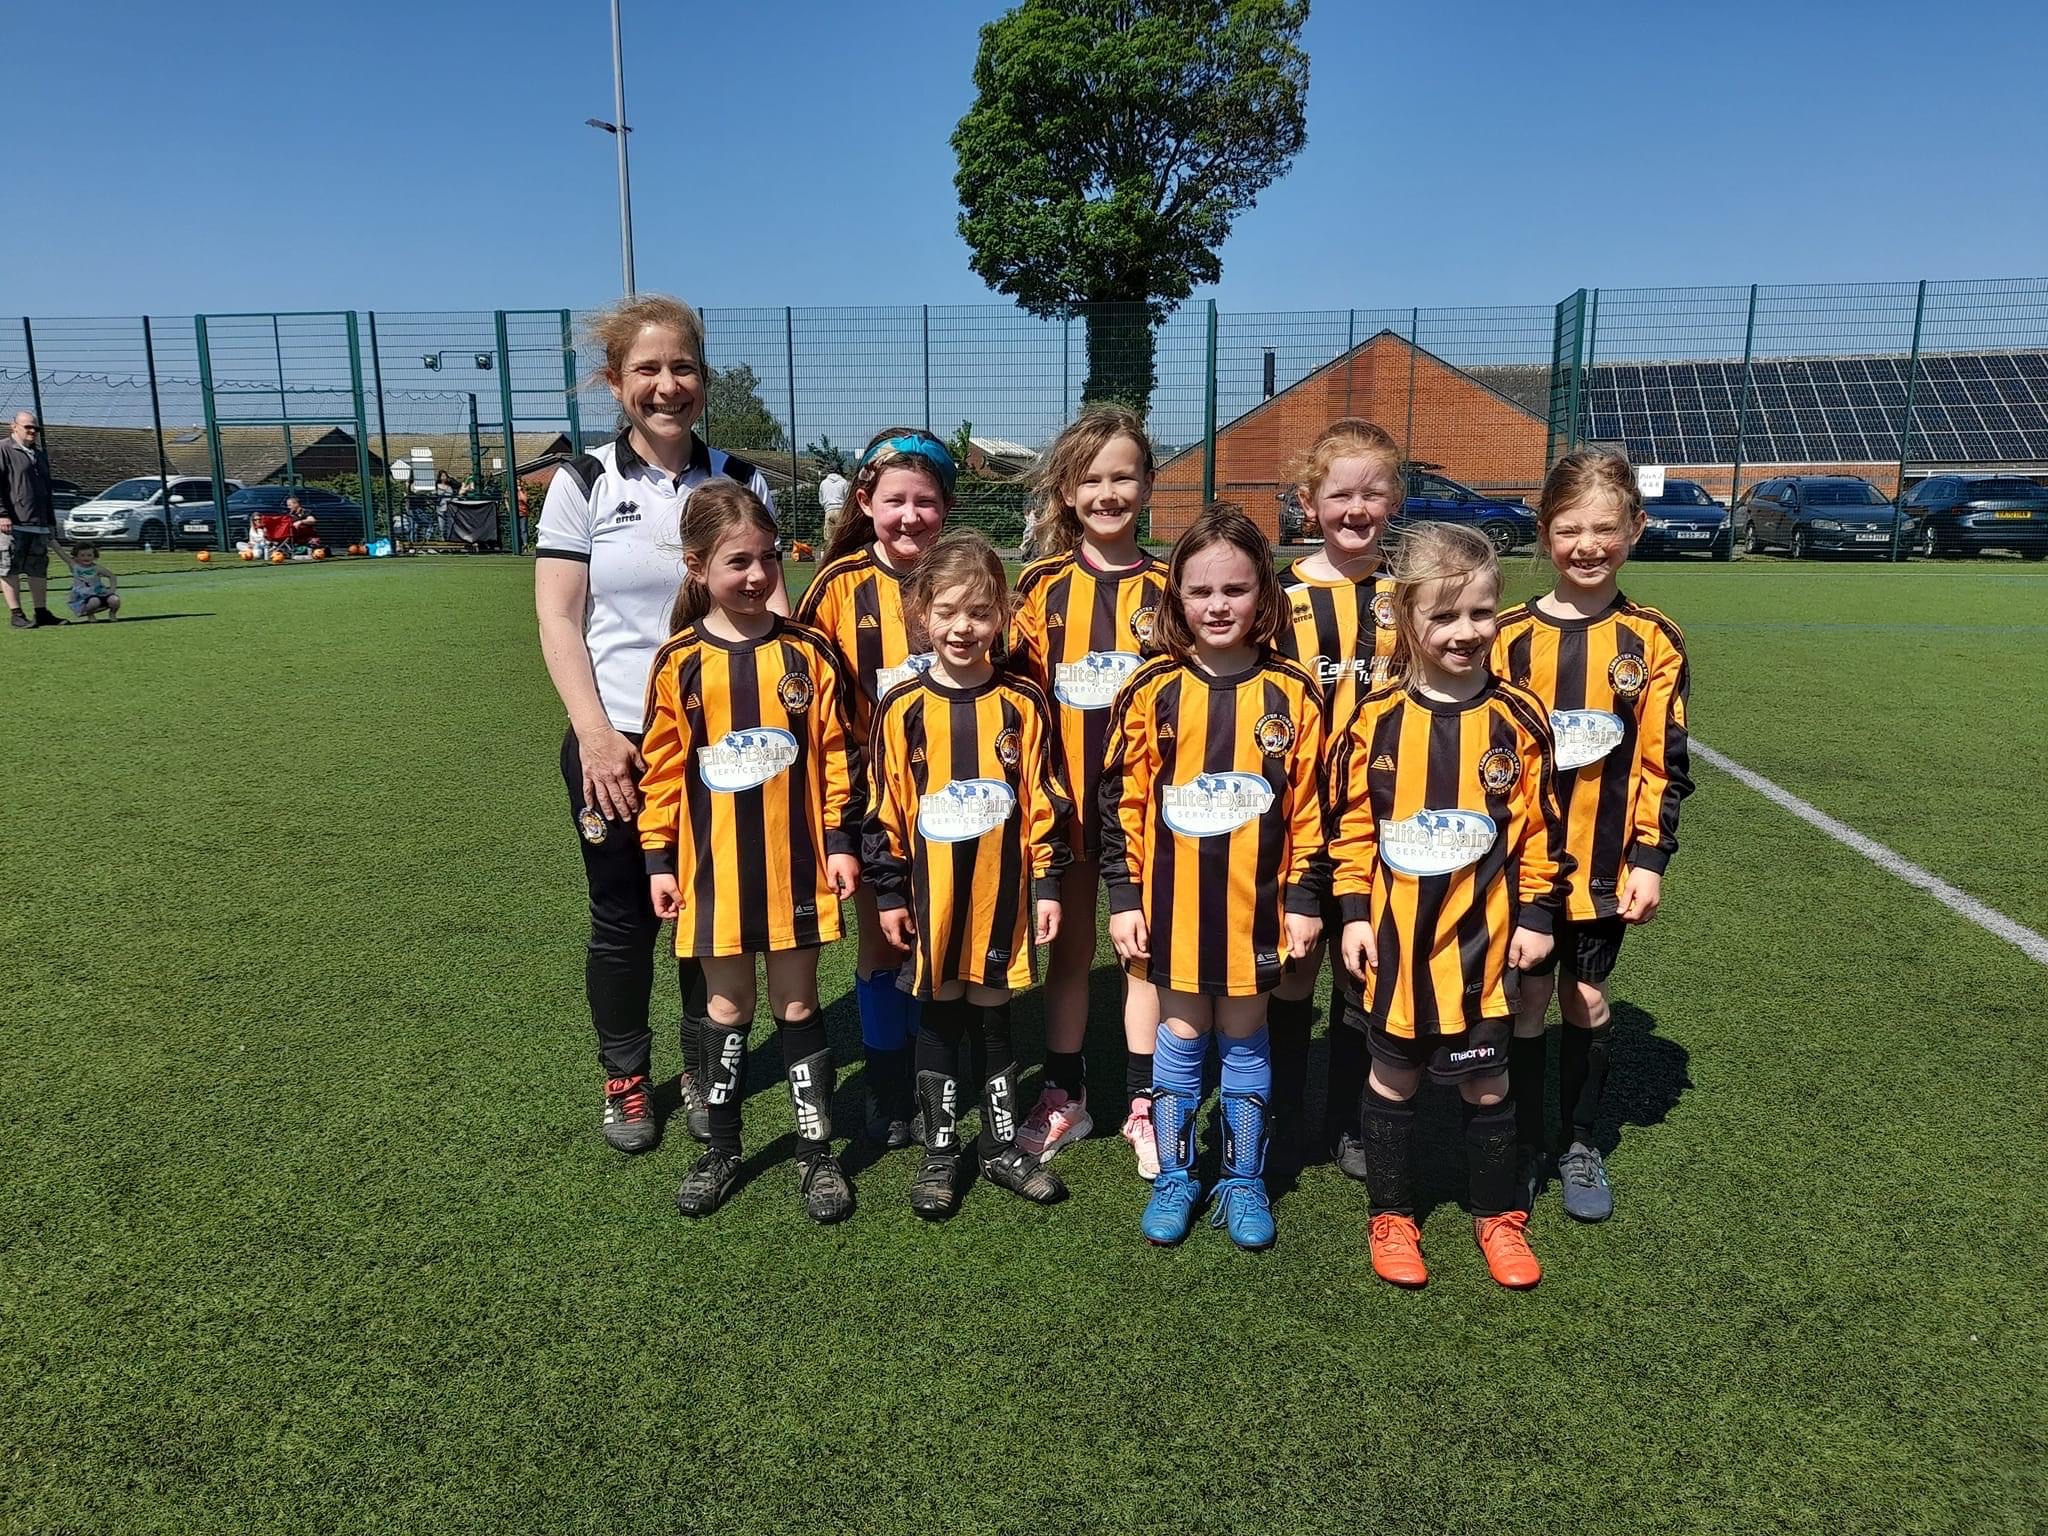 Rachel Burrough and the Axminster Town Girls Under 8s side